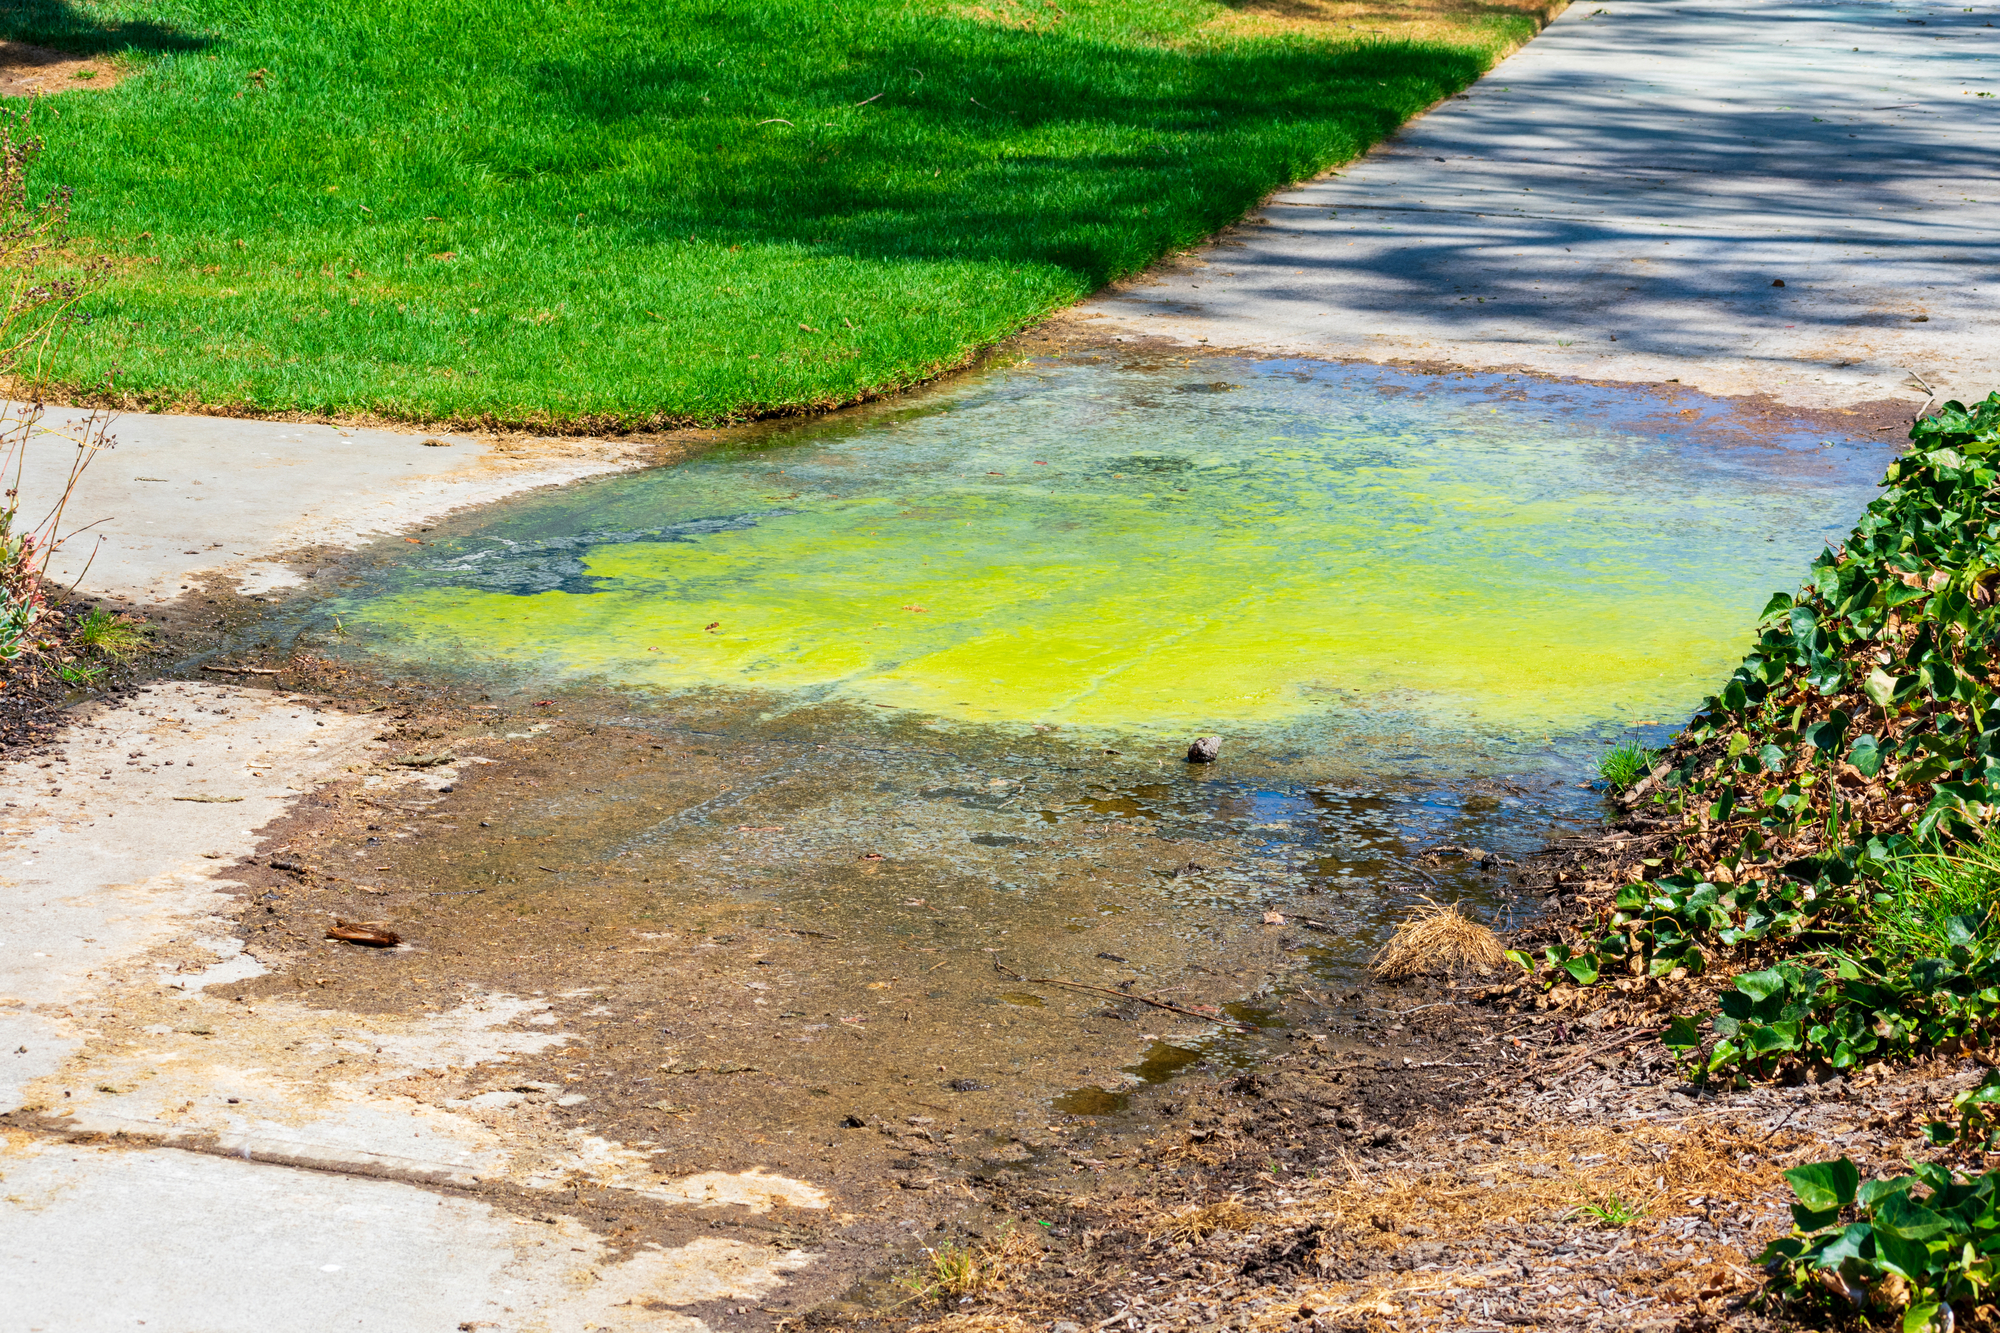 Sprinkler overspray causes constant dirty puddle of standing water on the sidewalk with growing algae.